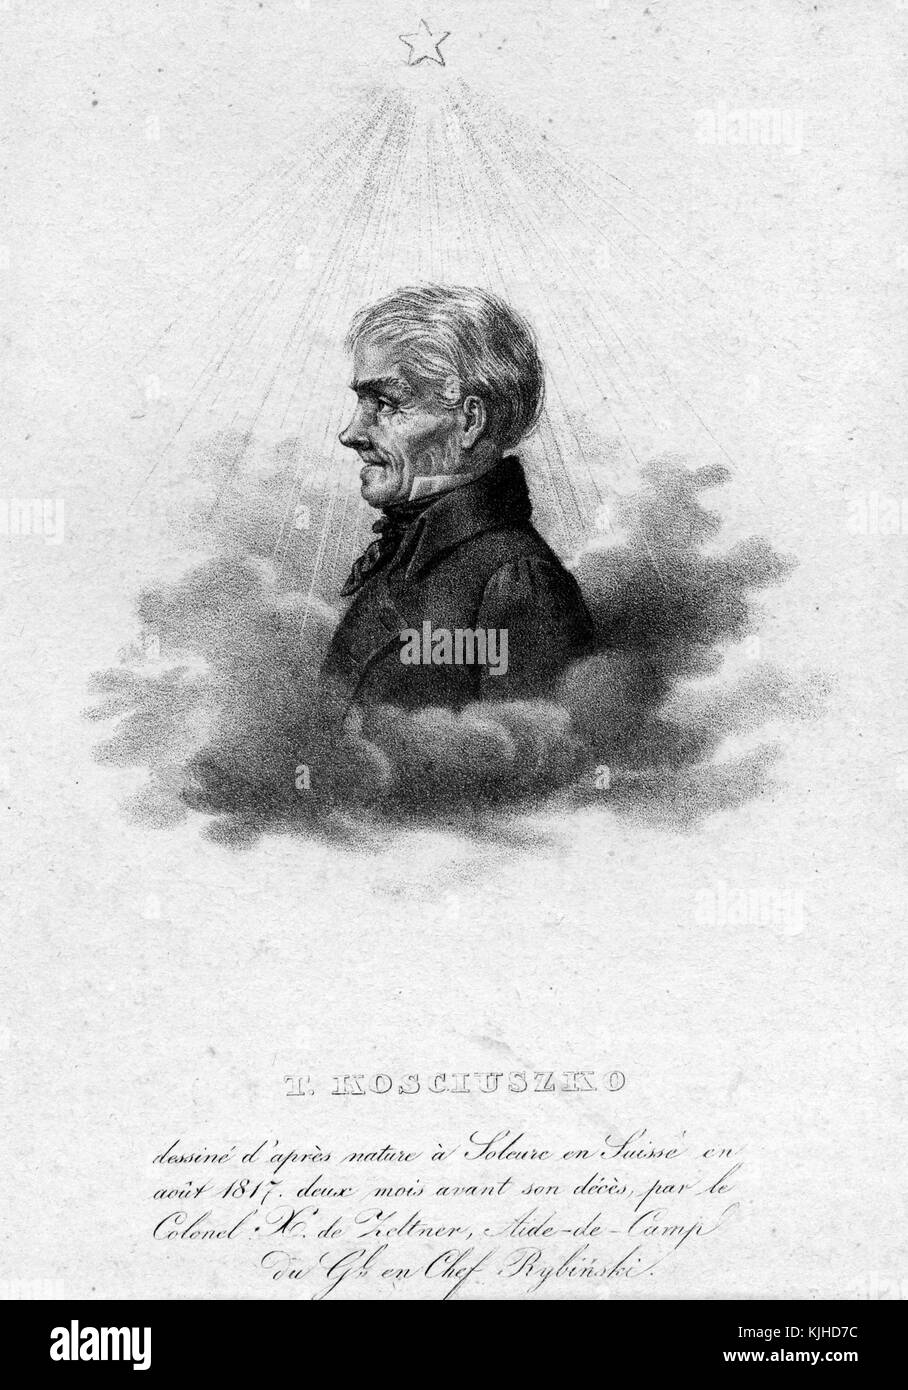 An etching from a portrait of Tadeusz Koand#347;ciuszko, he was a Polish-Lithuanian military engineer and leader, he served in the Continental Army during the American Revolutionary War and was awarded the rank of brigadier general in recognition of his services constructing state-of-the-art fortifications, after returning to Poland he was commissioned as a major general, he fought in the PolishRussian War of 1792 and eventually lead a failed uprising against the Russians, 1839. From the New York Public Library. Stock Photo